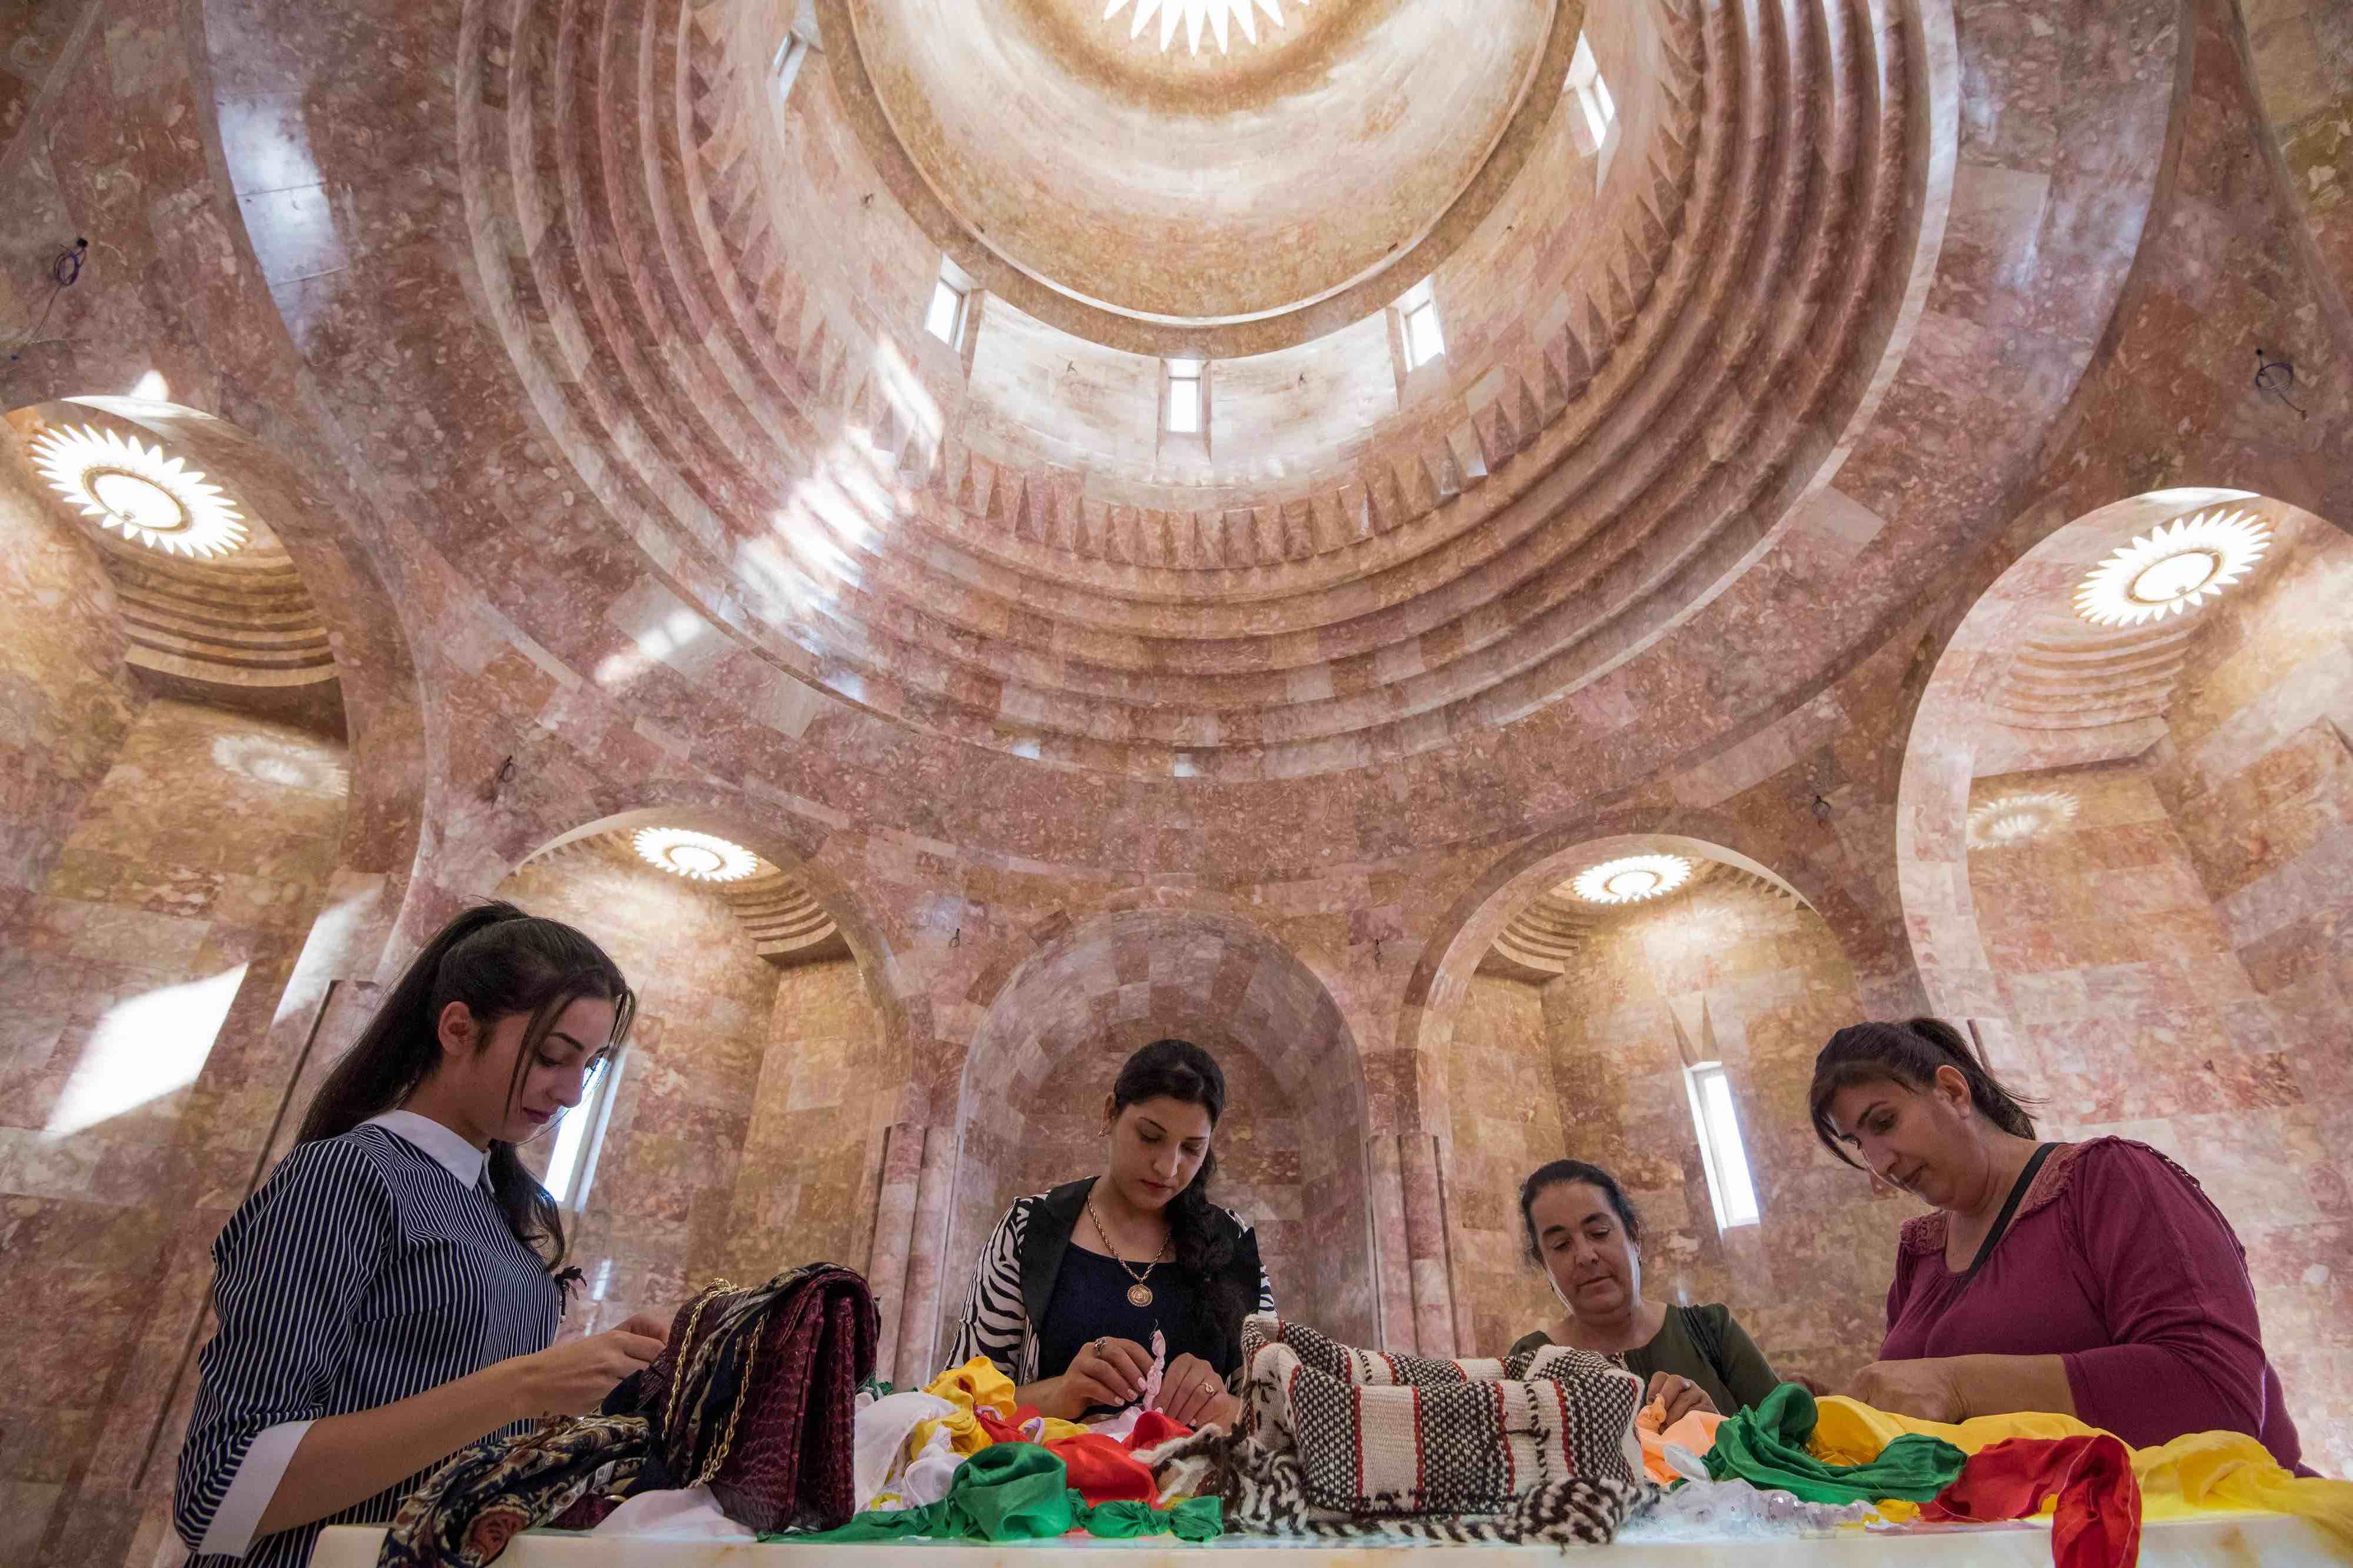 The temple's seven domes topped with sun symbols represent the seven angels revered by the Yazidis